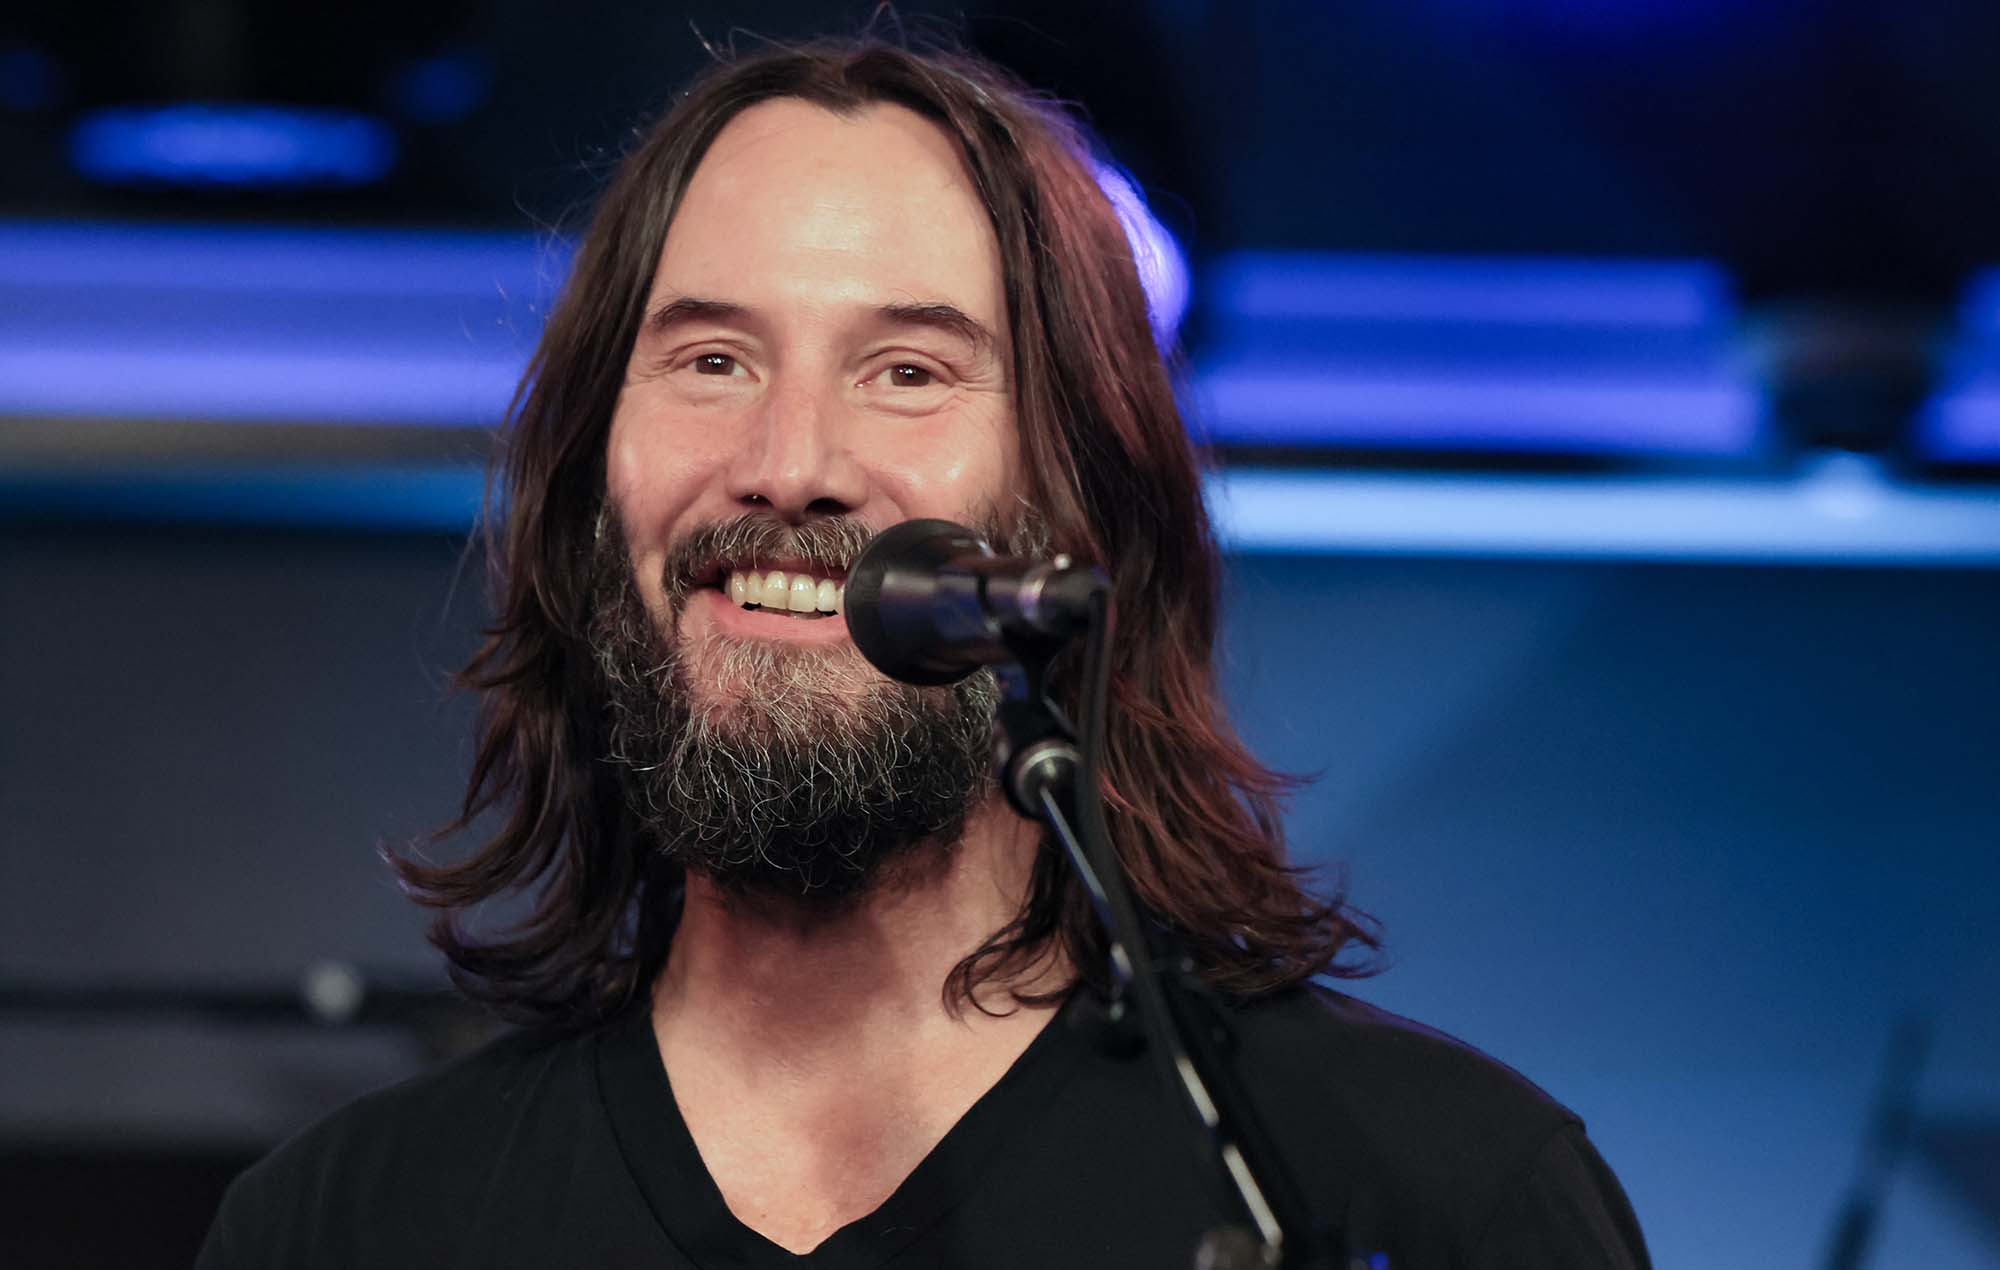 Keanu Reeves spotted playing catch with nine-year-old boy before concert